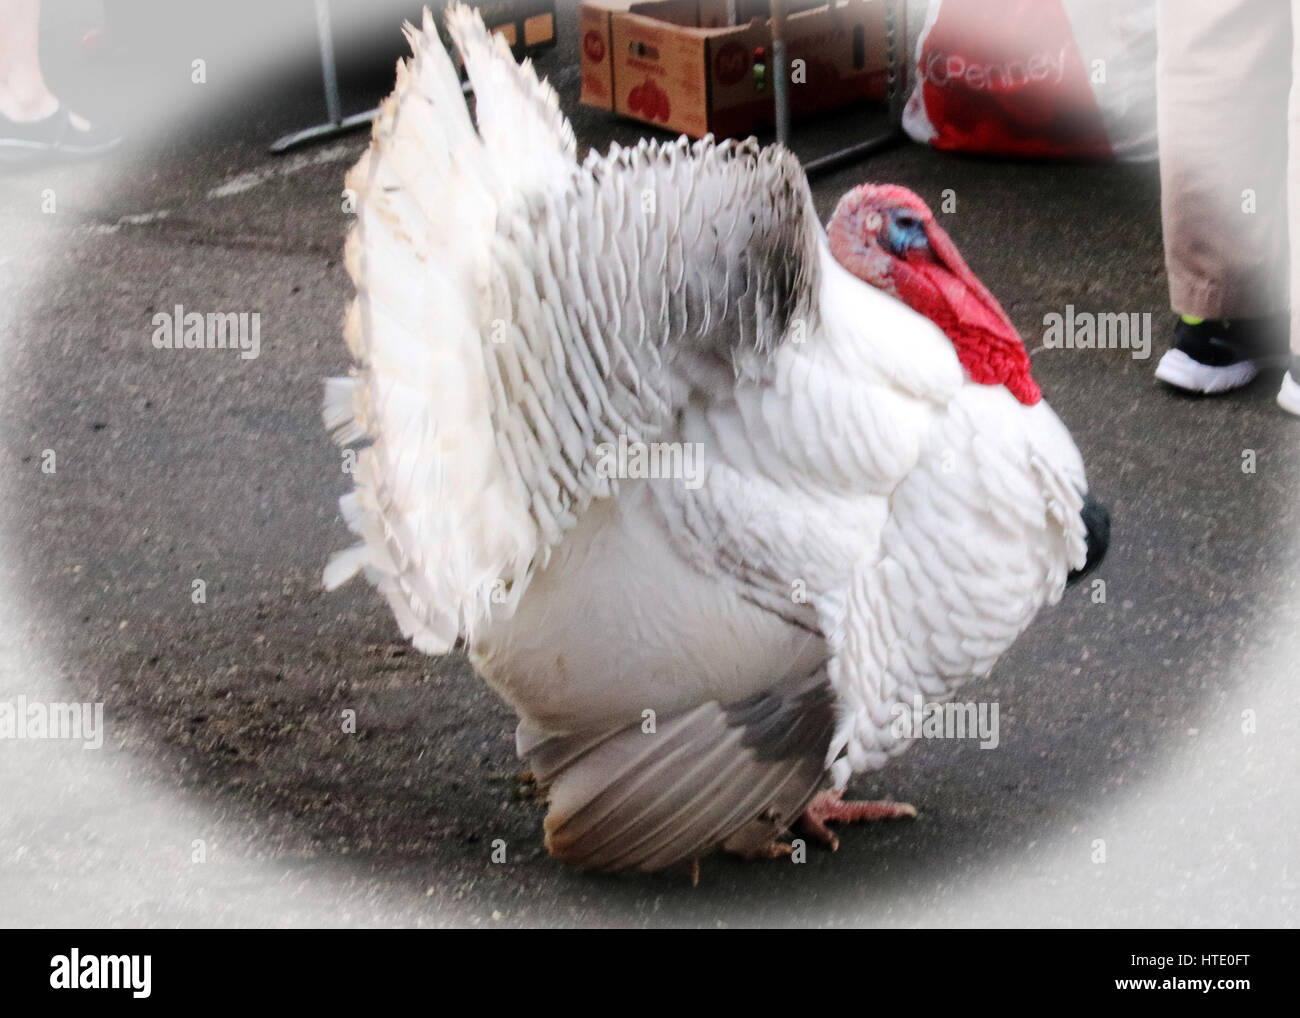 Mr. Turkey can really tuck his head and neck Stock Photo